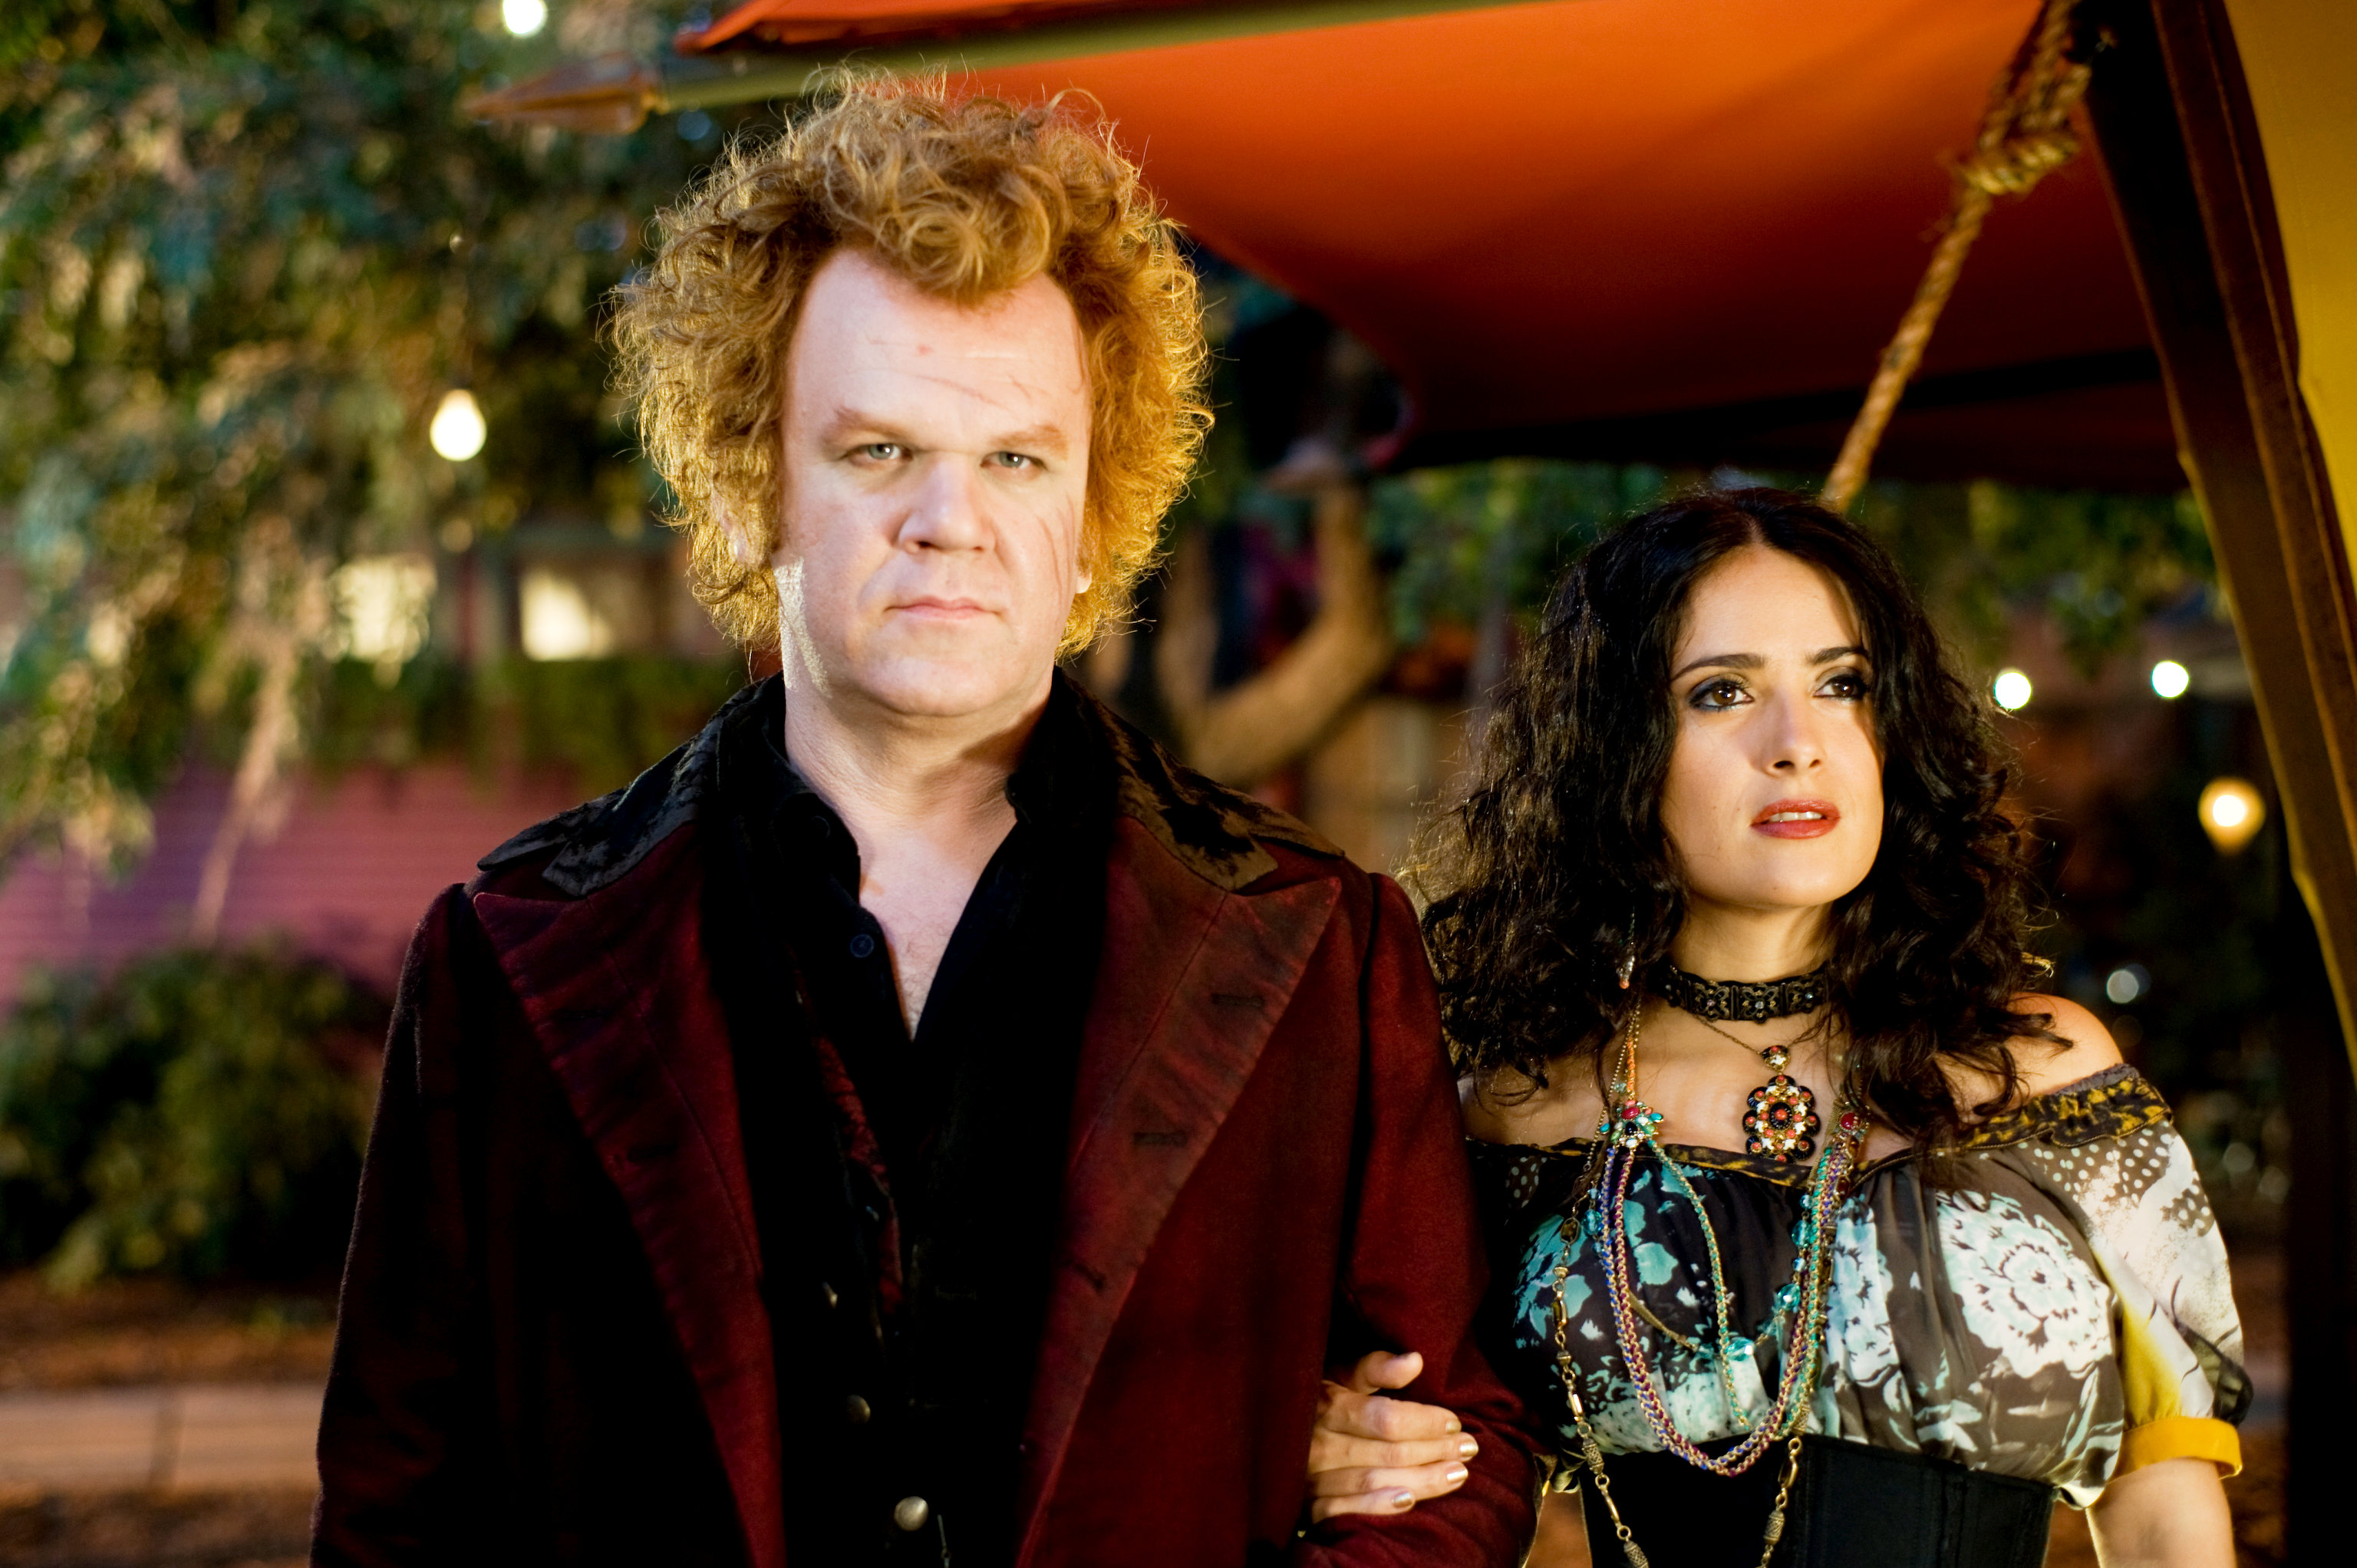 John C. Reilly stars as Larten Crepsley and Salma Hayek stars as Madame Truska in Universal Pictures' The Vampire's Assistant (2009)